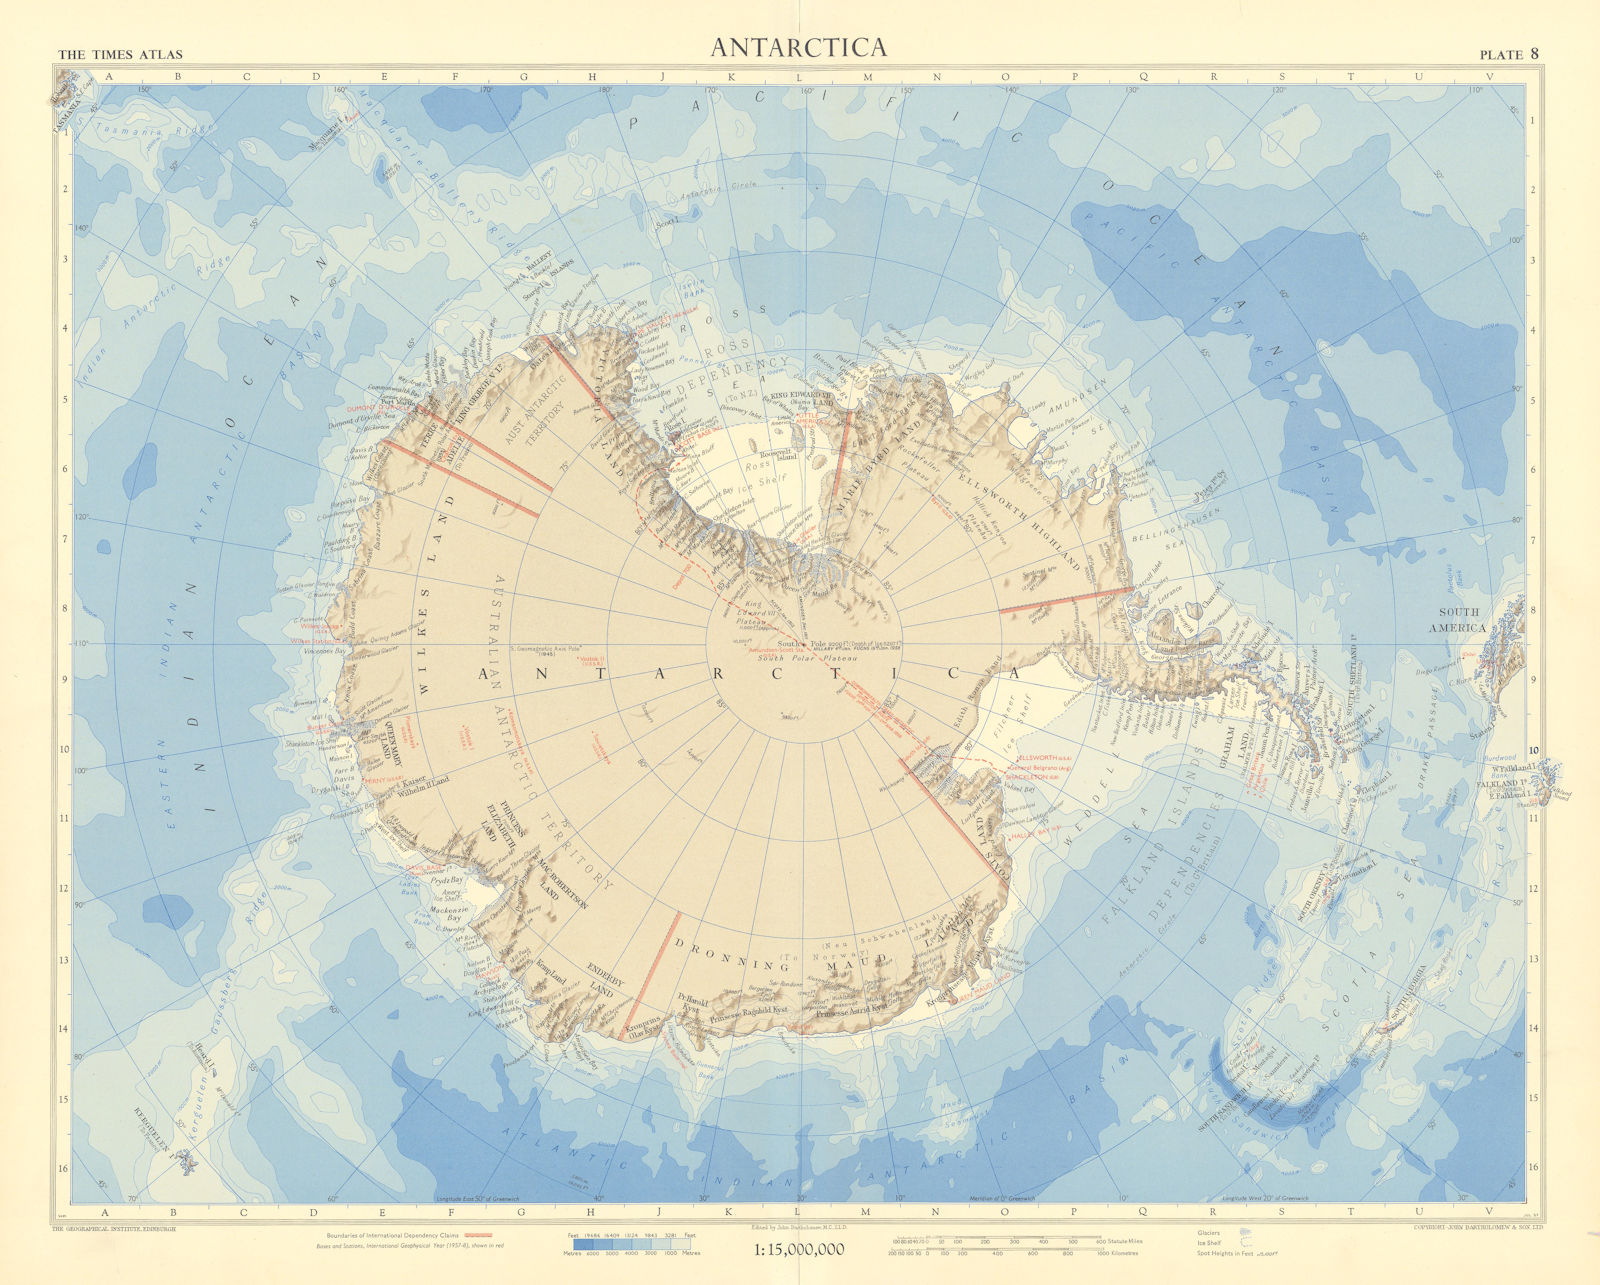 Antarctica. Research stations & CTAE 1957-58 route. South Pole. TIMES 1958 map